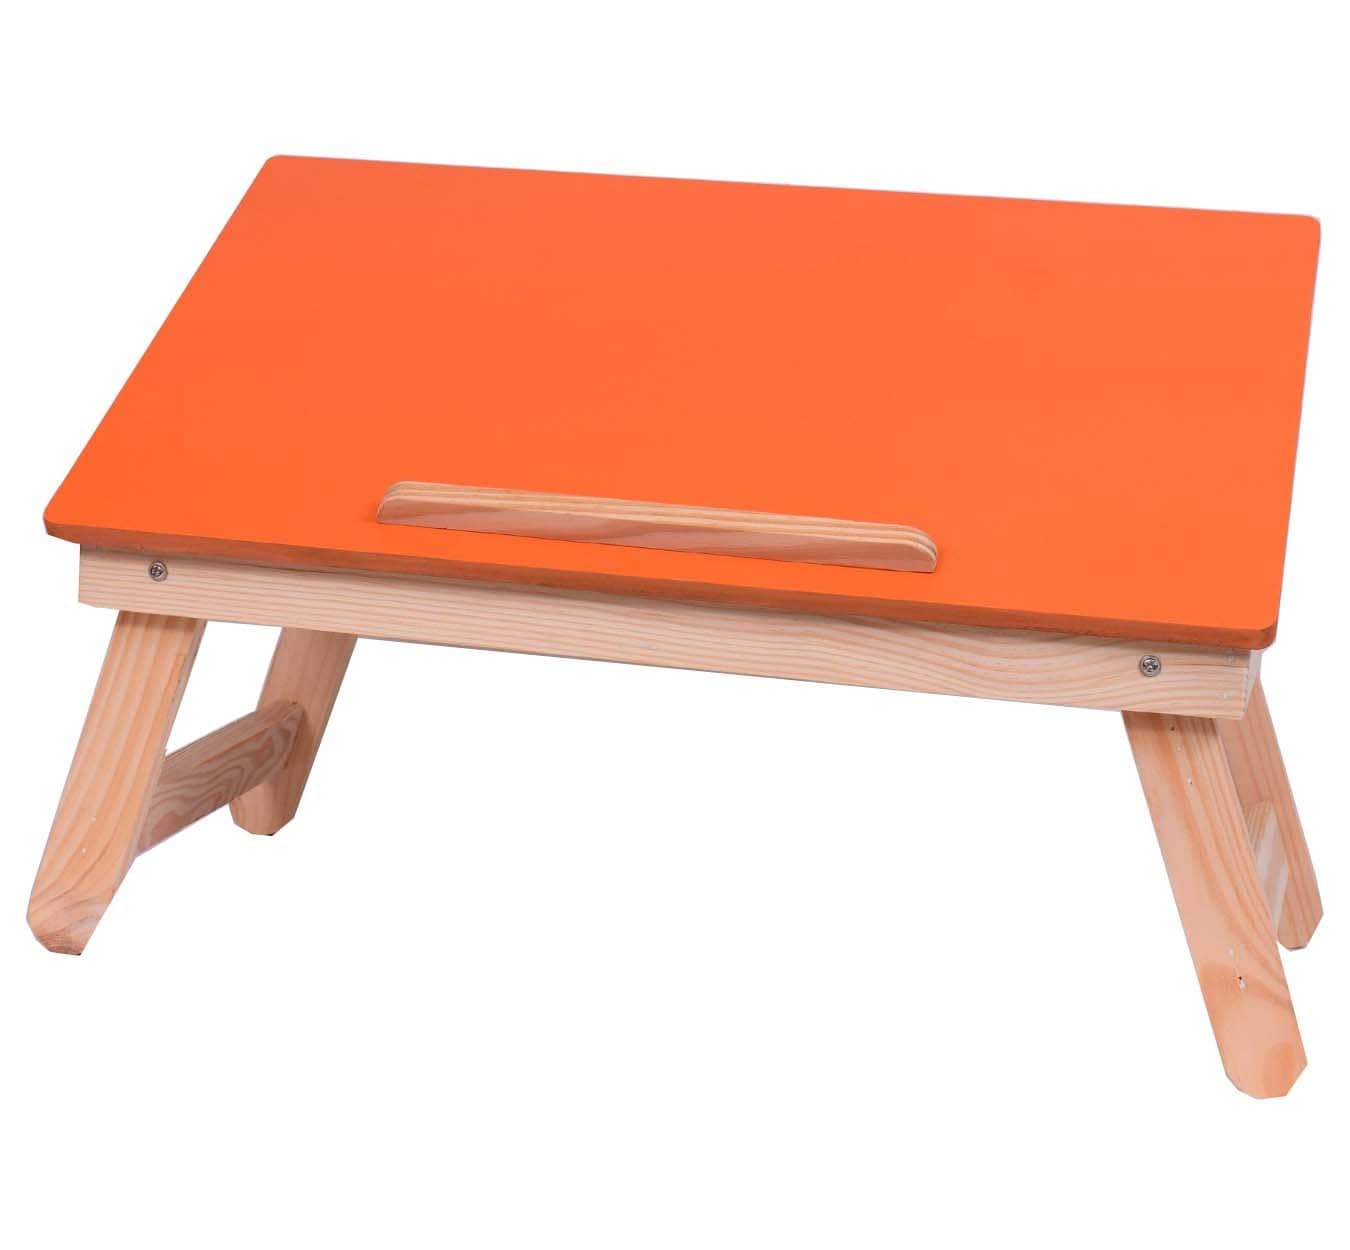 wooden foldable laptop & study table for kids orange open view